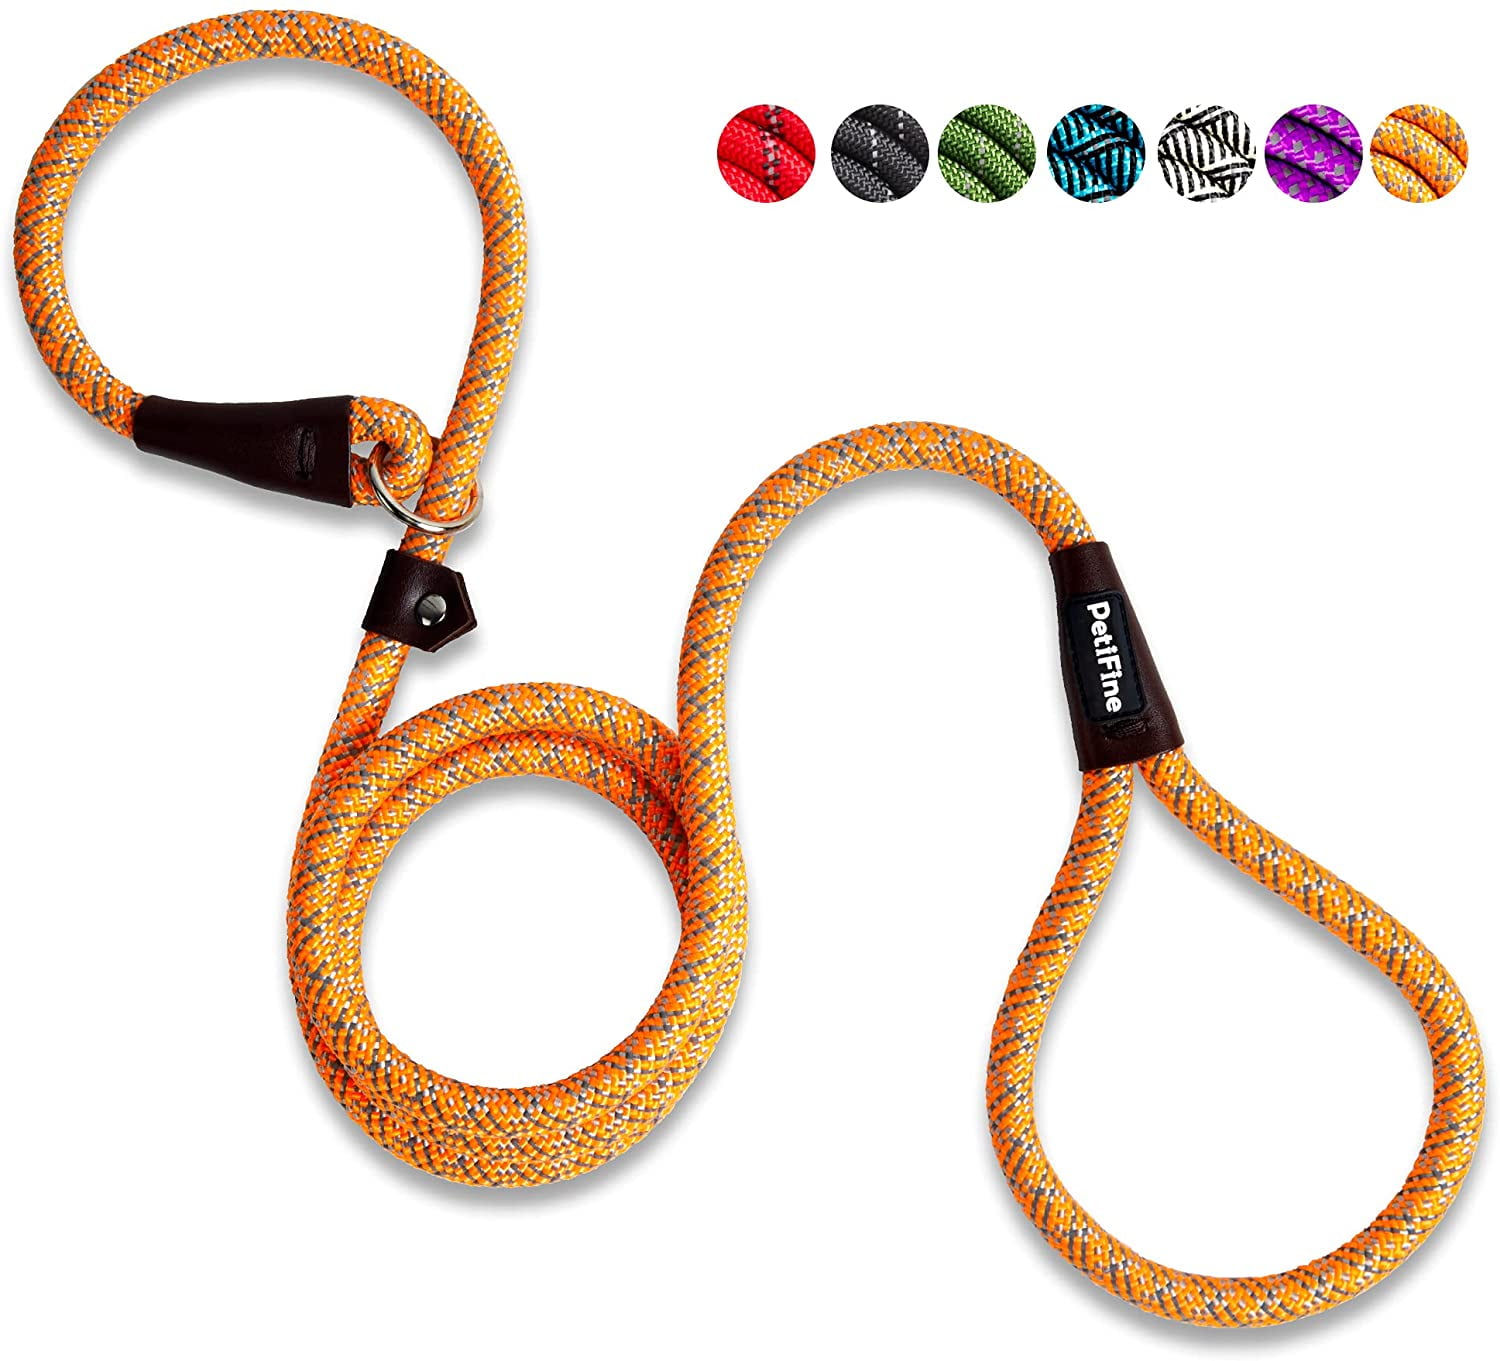 1,5m Rope Slip Lead Dog Leash Heavy Duty Nylon Training Lead with Soft Handle for Small Medium and Large Dogs 